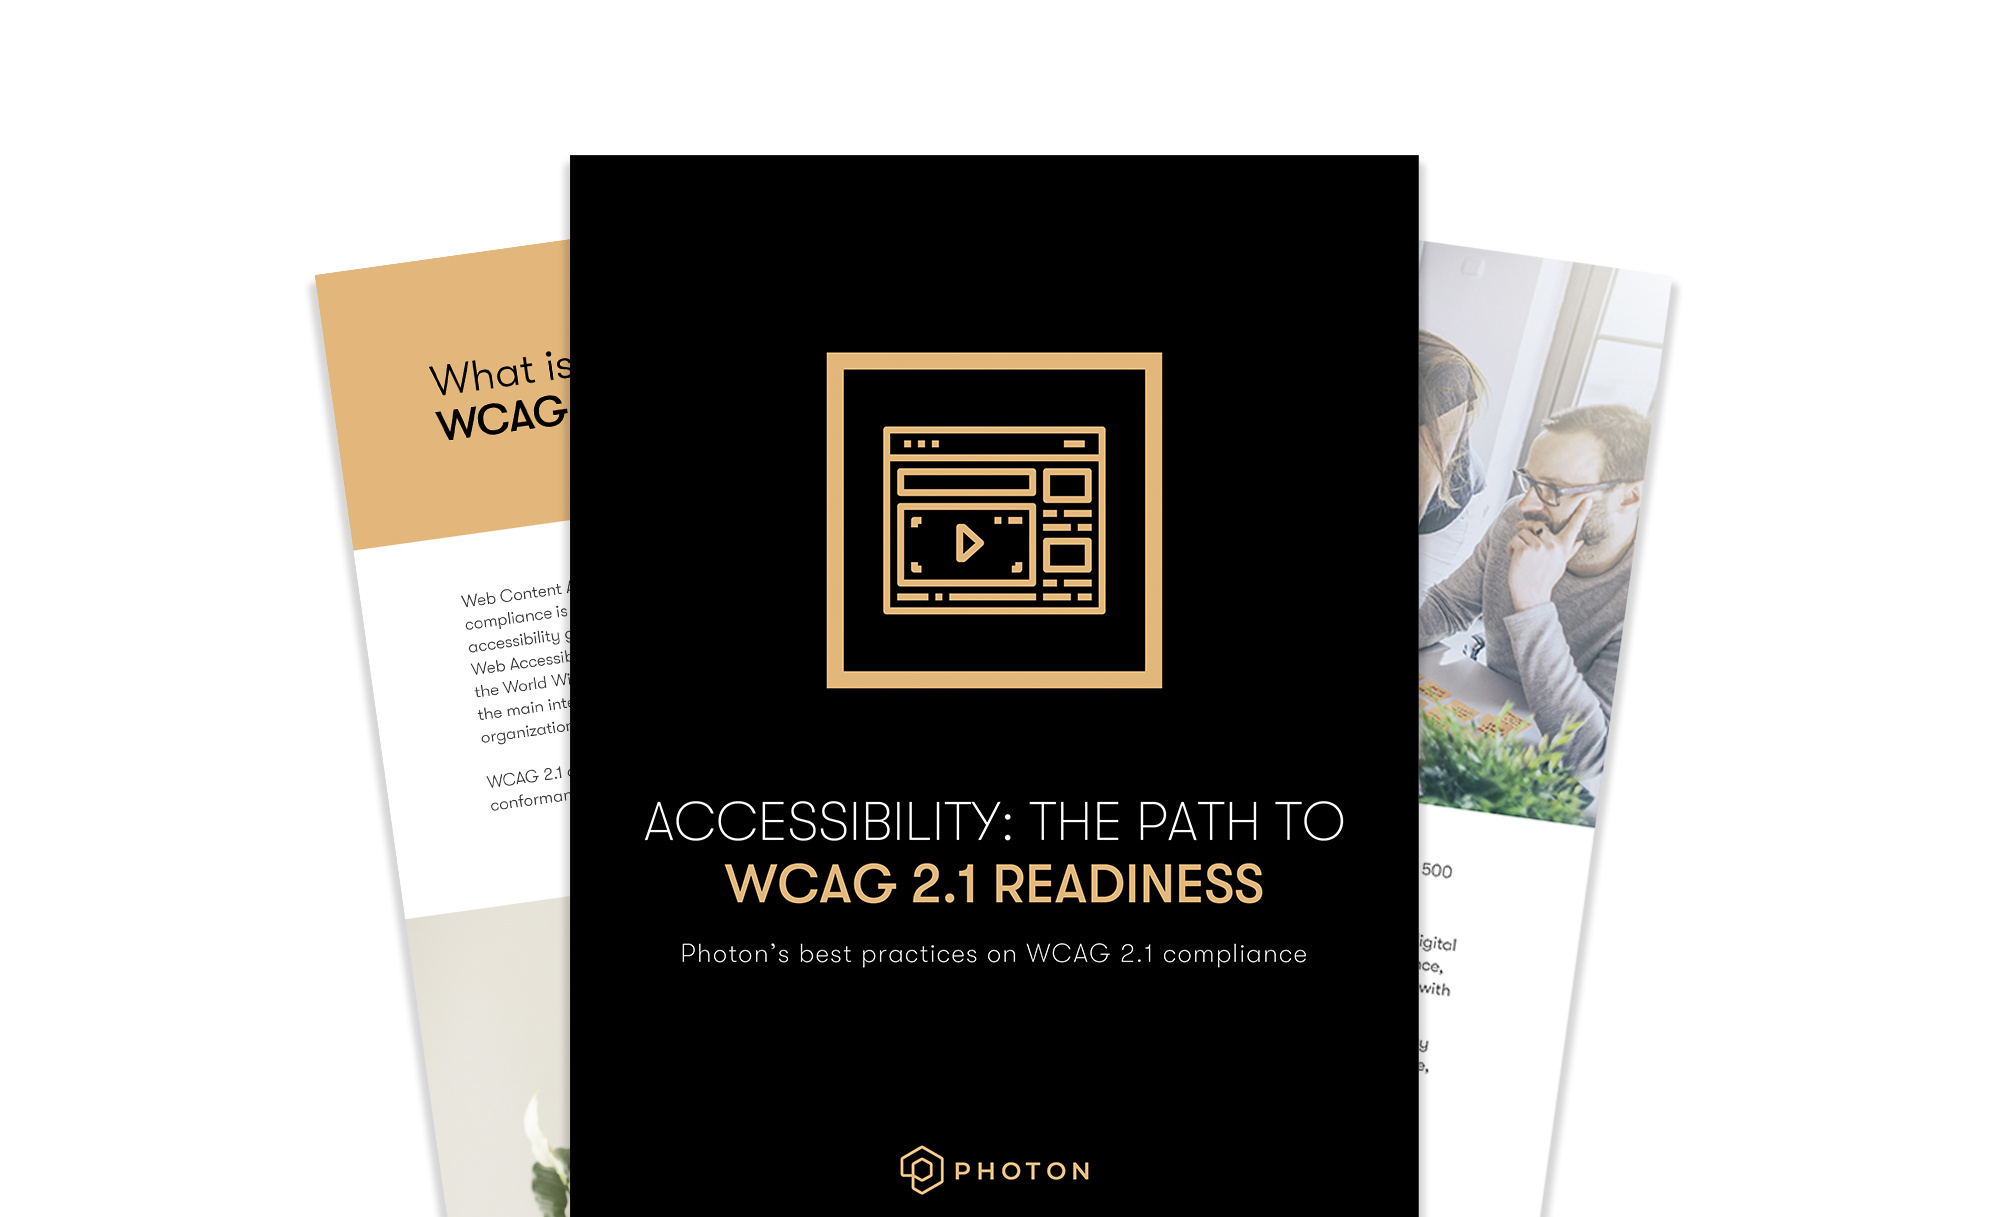 Photon’s WCAG 2.1 best practices guide